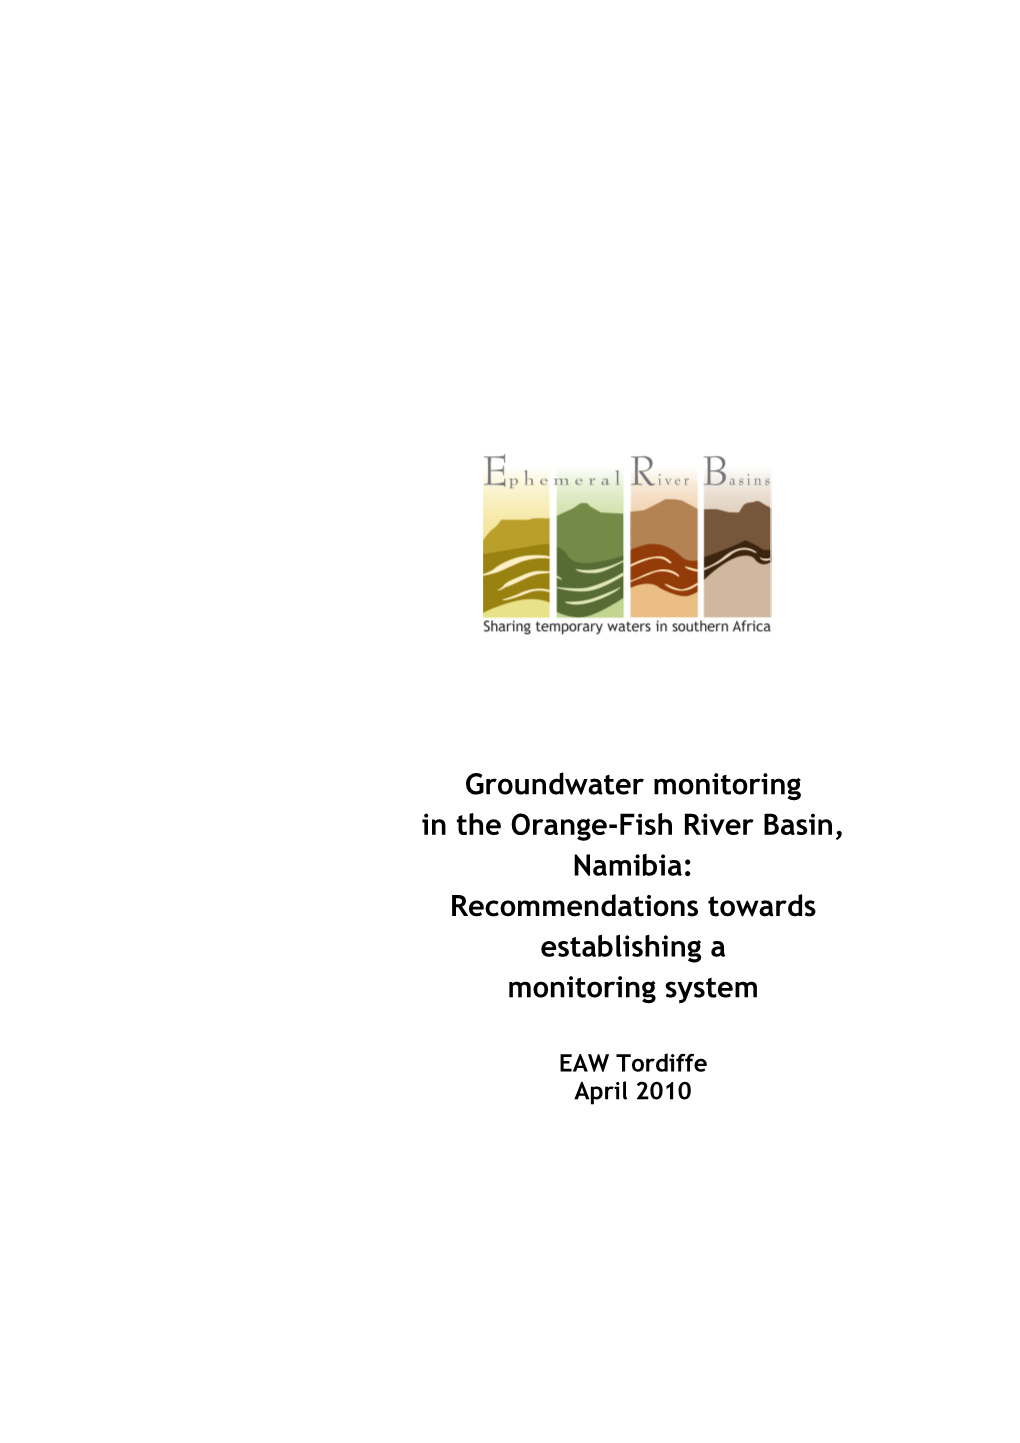 Groundwater Monitoring in the Orange-Fish River Basin, Namibia: Recommendations Towards Establishing a Monitoring System